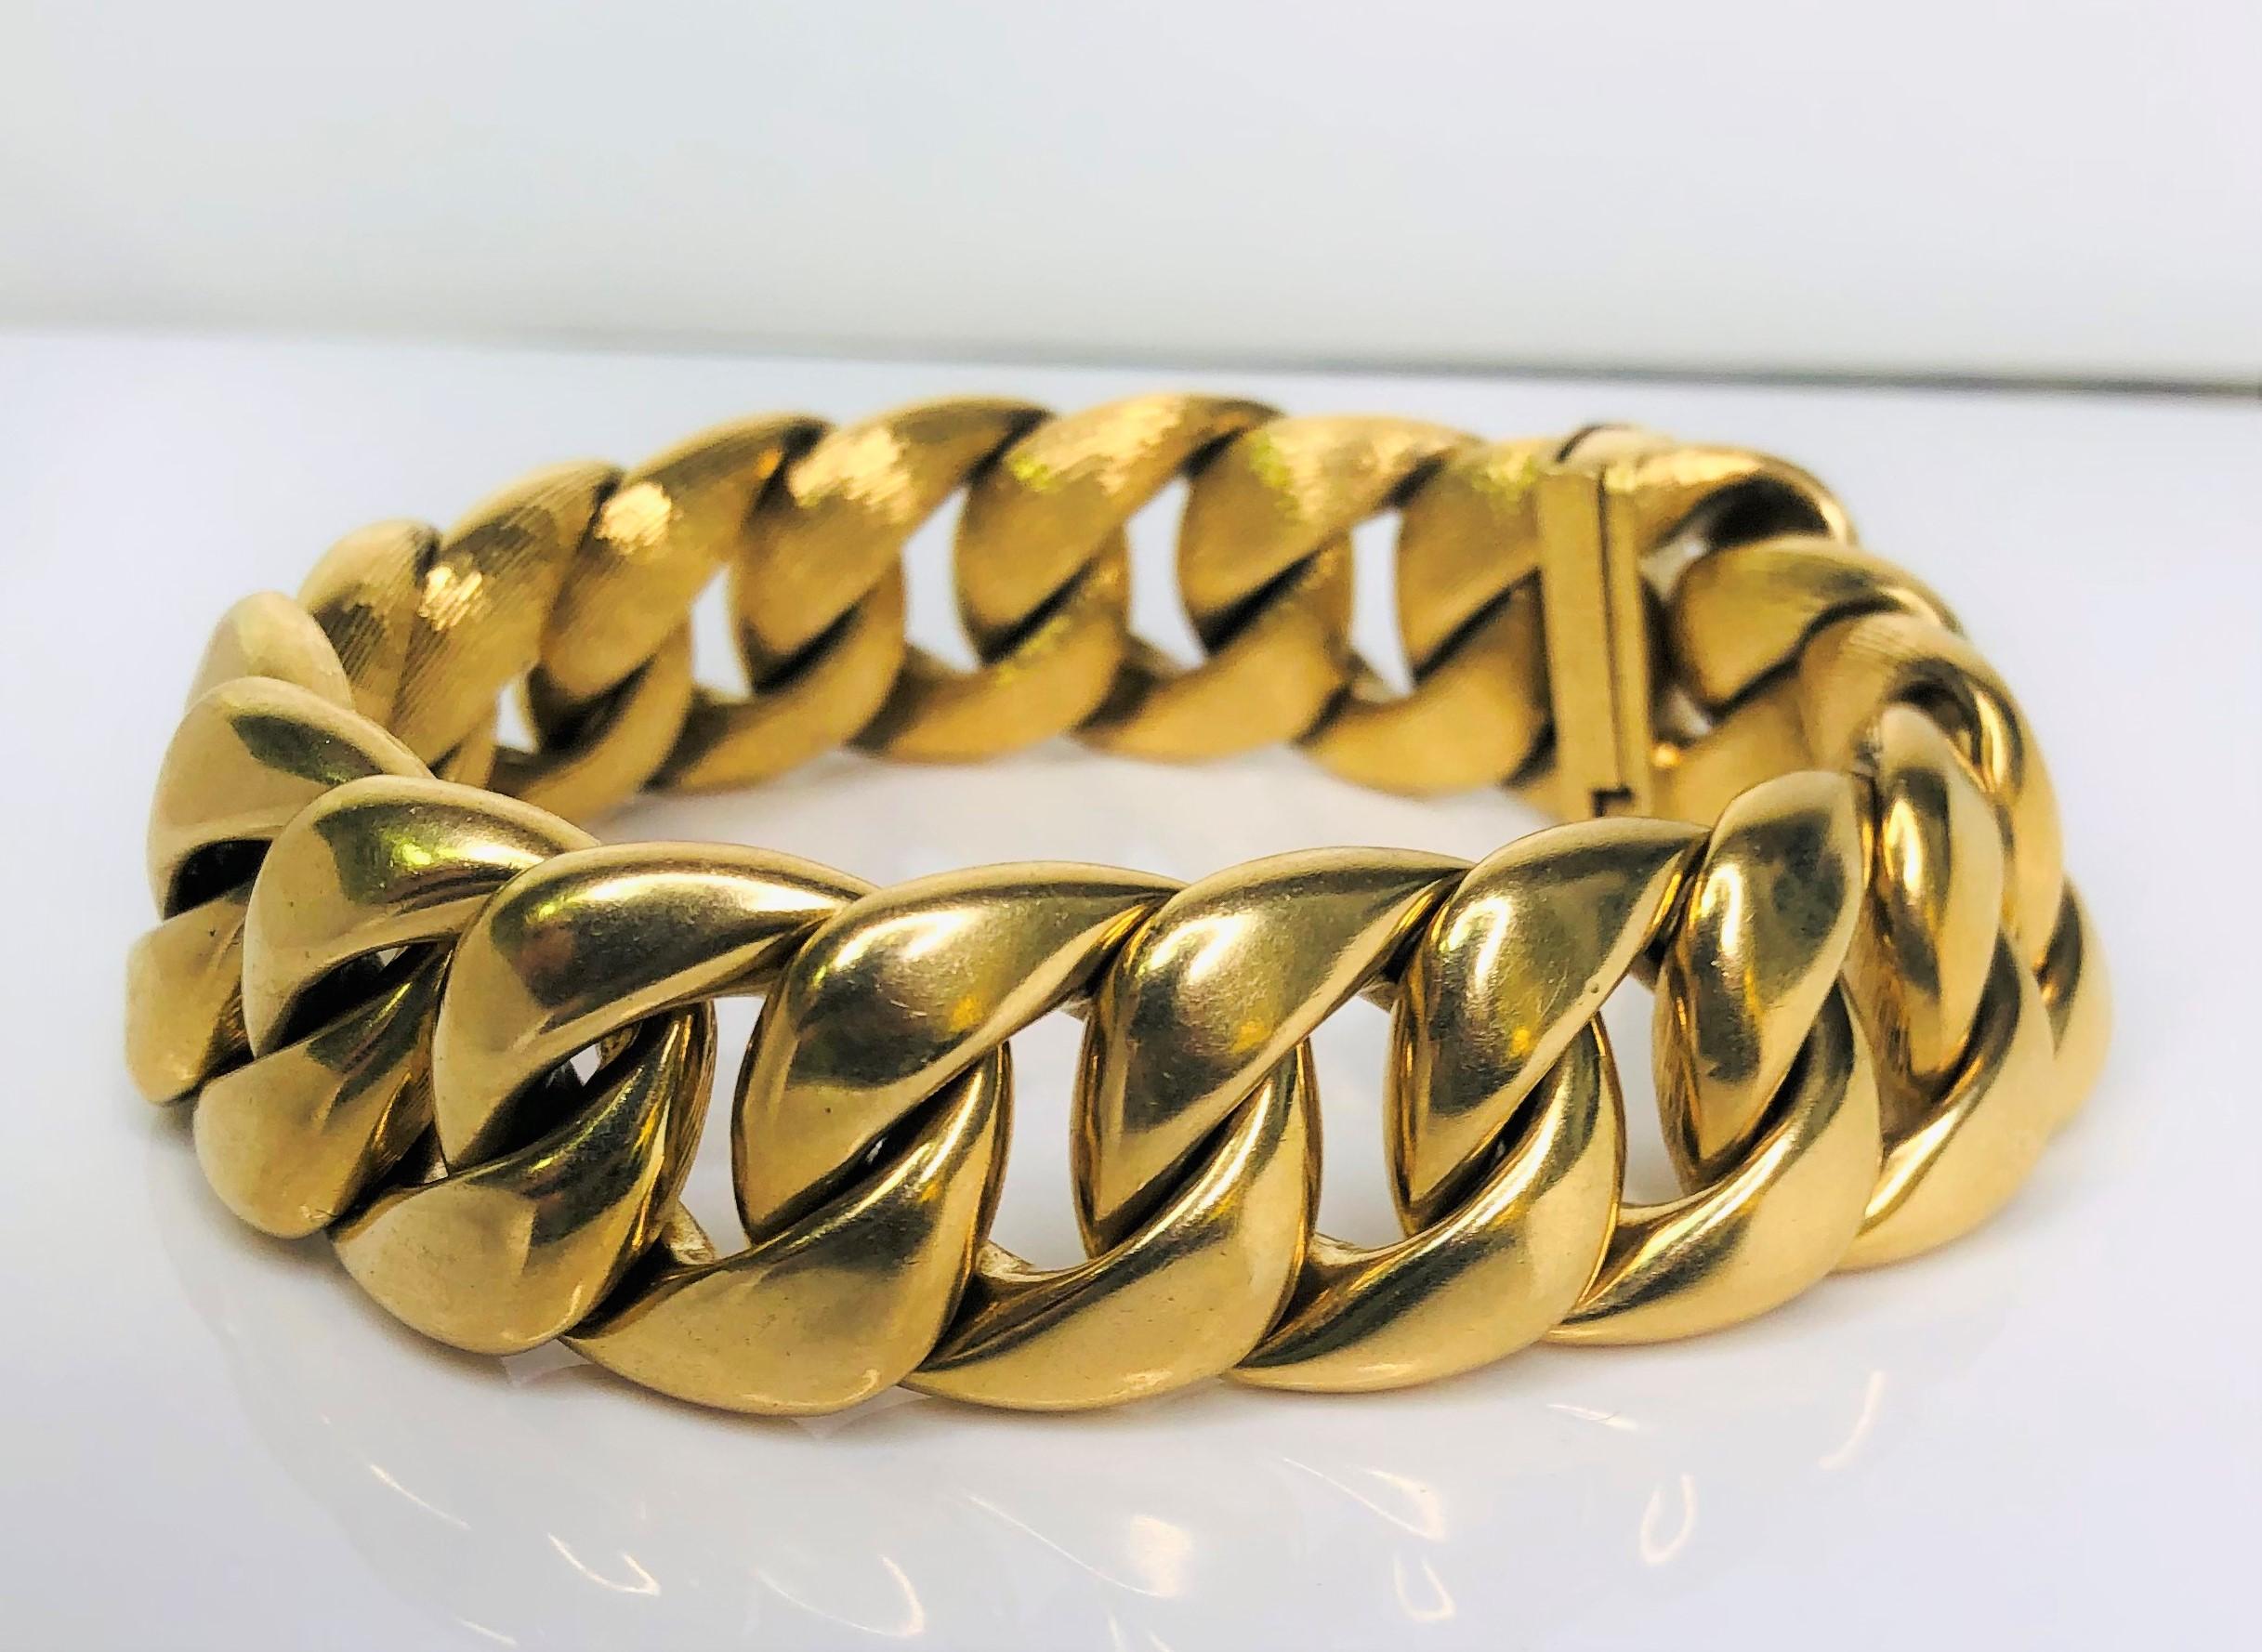 Two beautiful bracelets in one! 
This can be worn with the polished side showing or reversed to show the textured side! 
Great weight and quality!
Cuban link style with slide closure and safety bar
Approximately 7.75 inches long and .75 inches